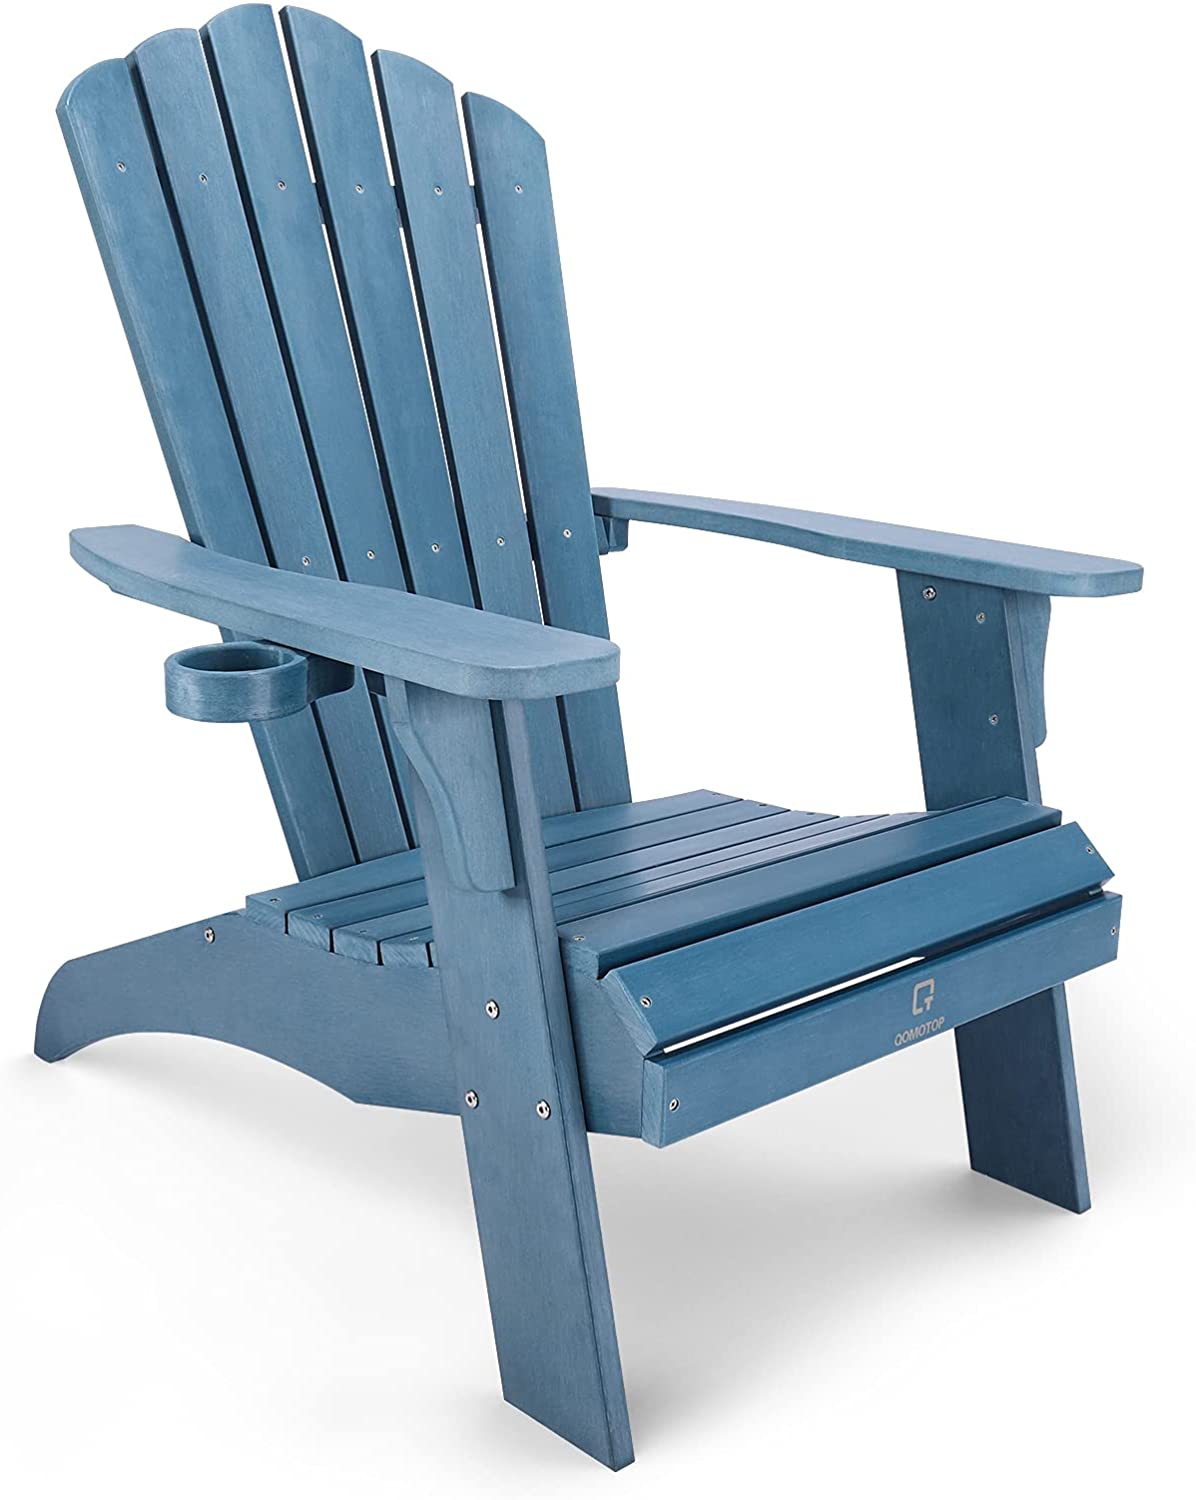 QOMOTOP Oversized Poly Lumber Adirondack Chair with Cup Holder, All-Weather Chair for Fire Pit & Garden,Fade-Resistant Lounge Chair with 350lbs Duty Rating, 38L 30.25W 41.5H (Blue) - image 1 of 7